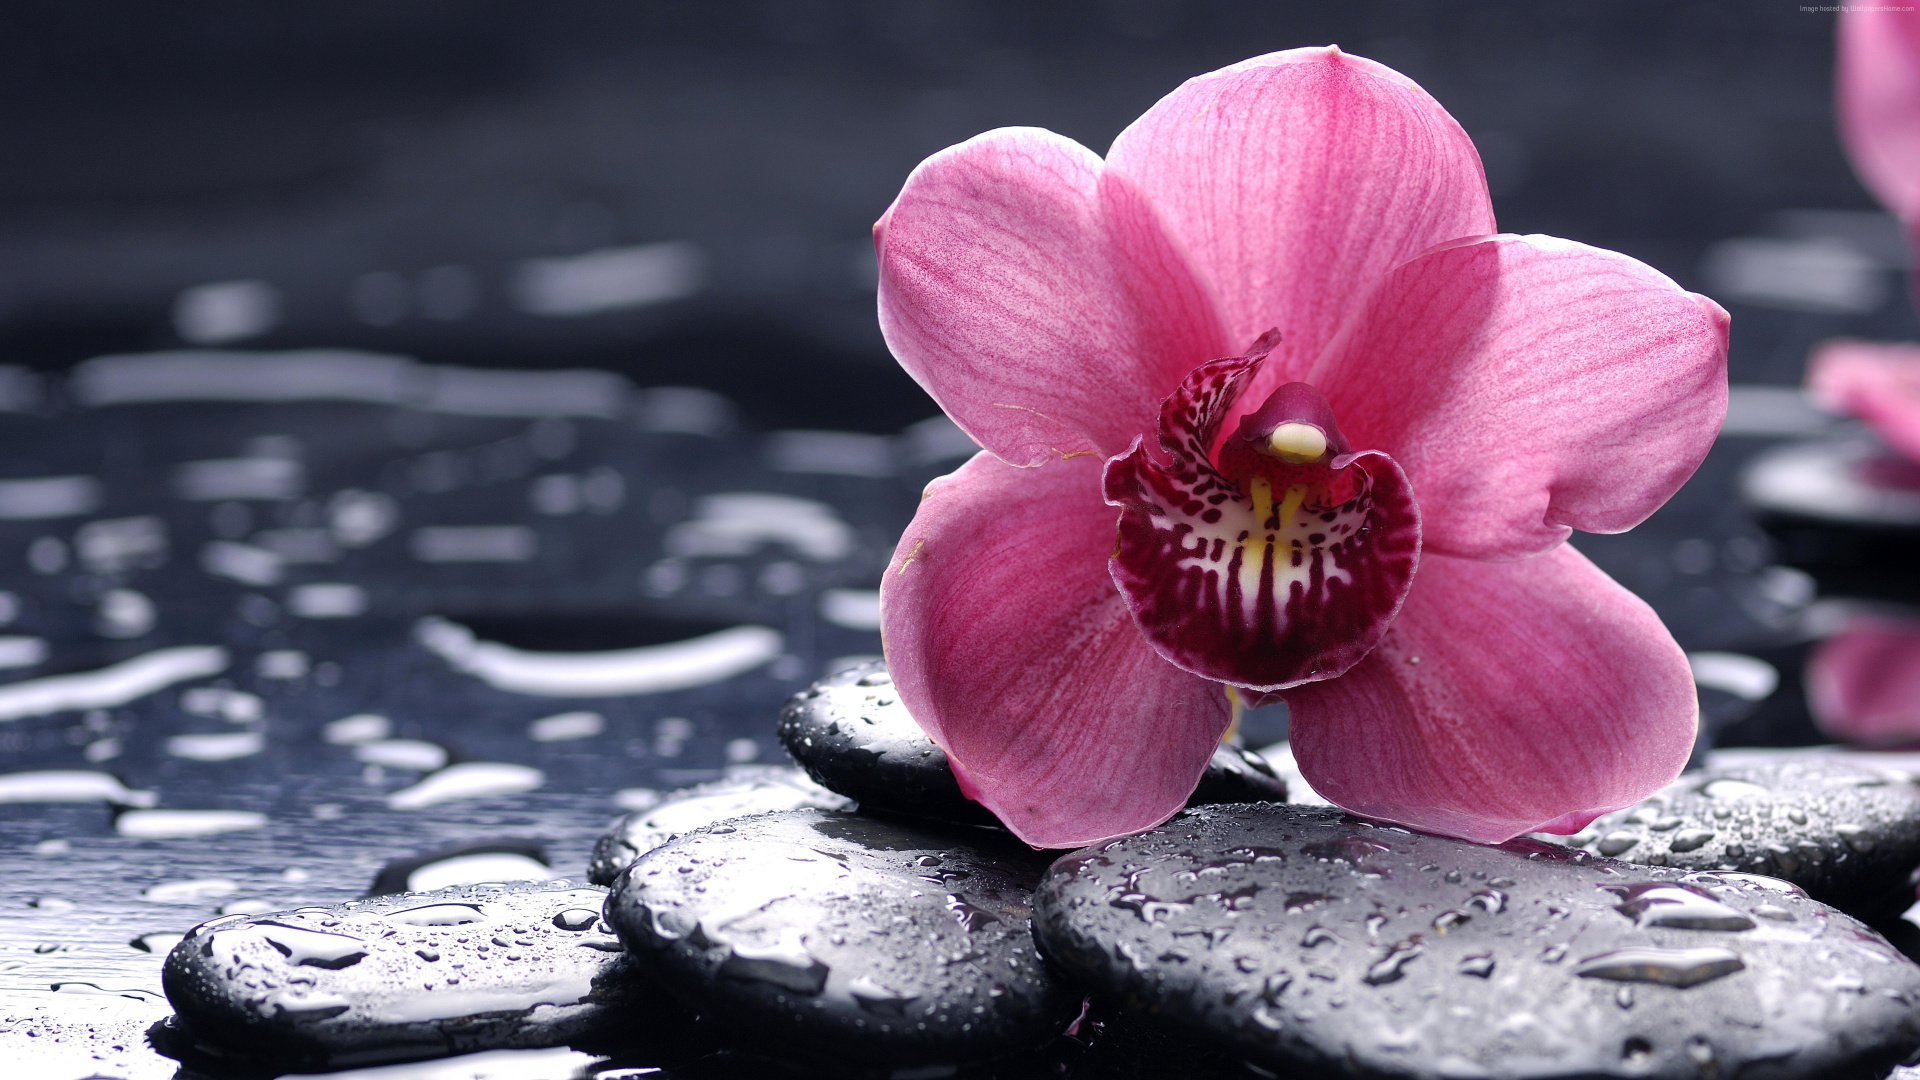 Pink Flower on Black Surface. Wallpaper in 1920x1080 Resolution